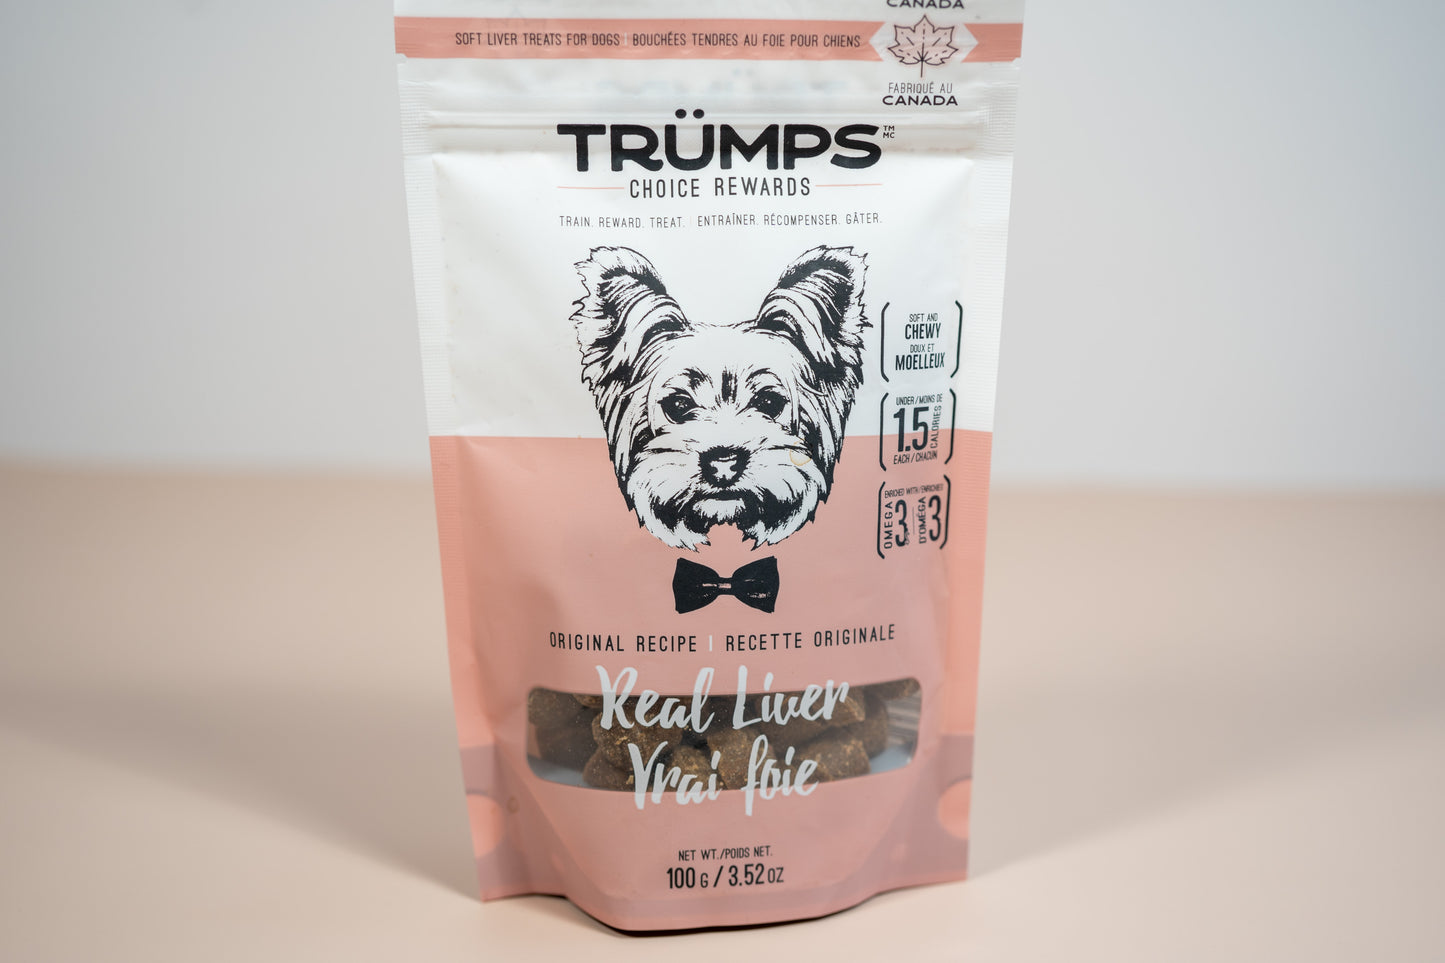 Trumps choice rewards real liver dog treats made in Canada.